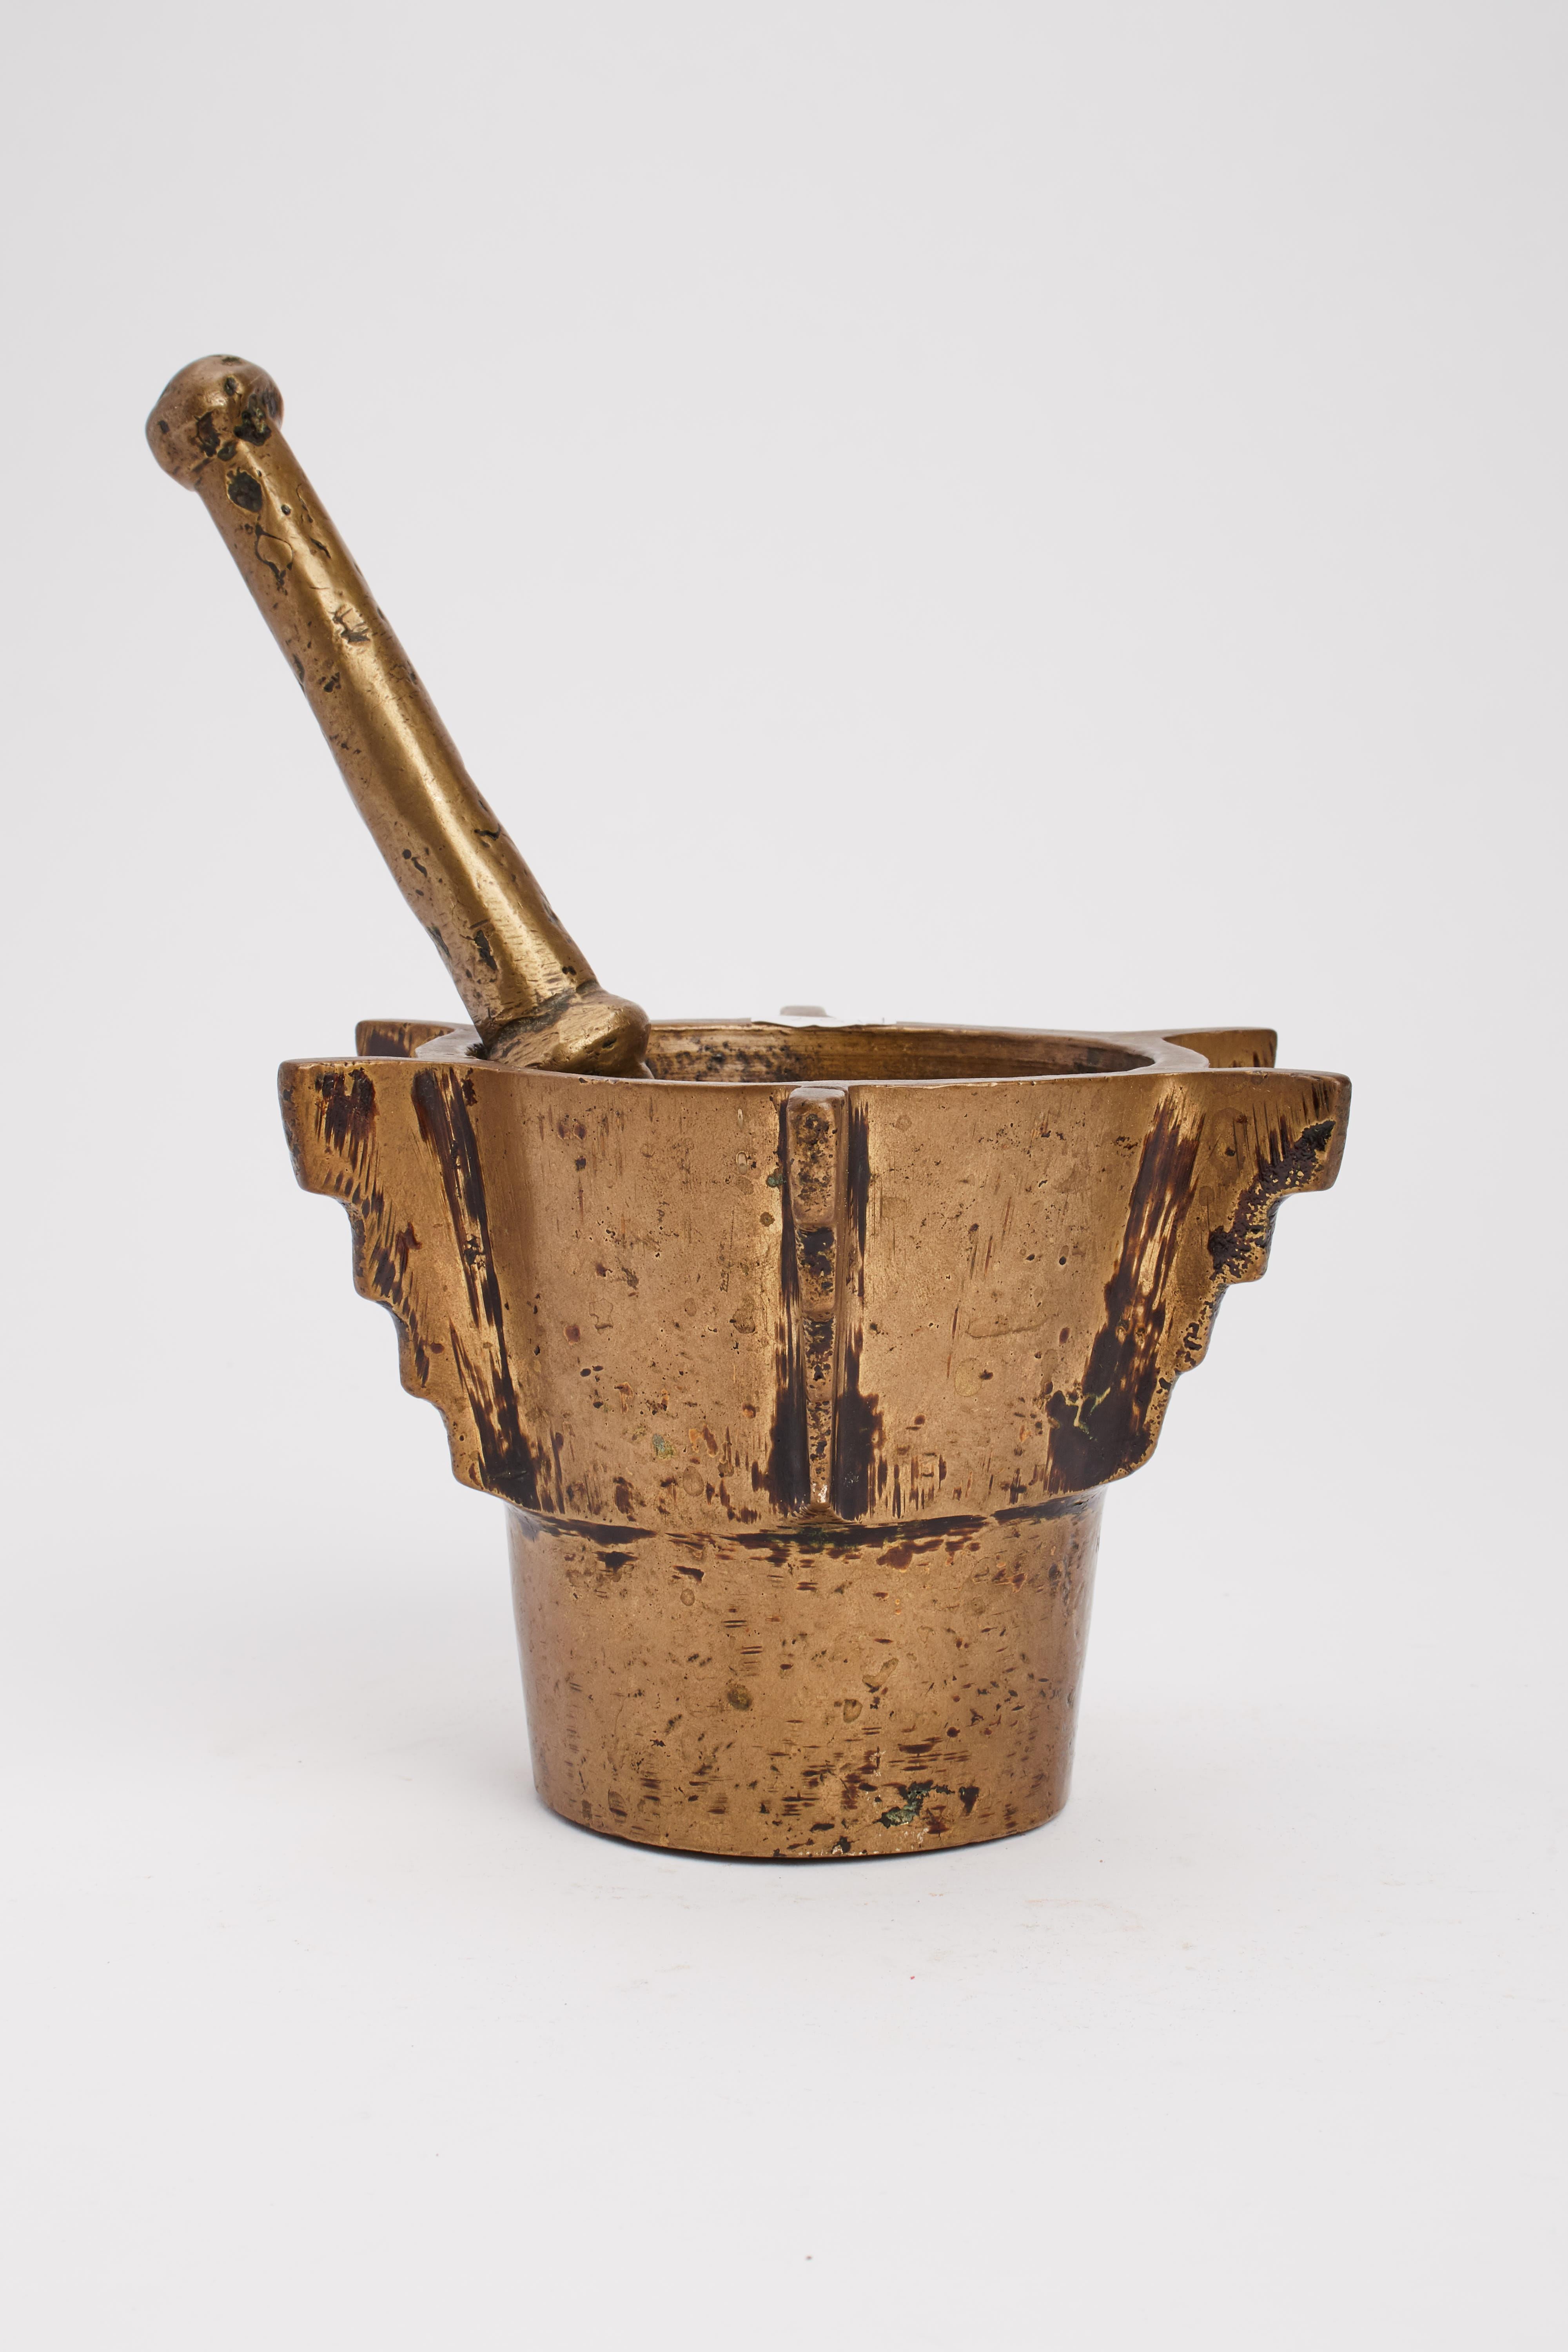 Bronze Apothecary mortar, fitted with mortar pestle. Italy early 18th century.